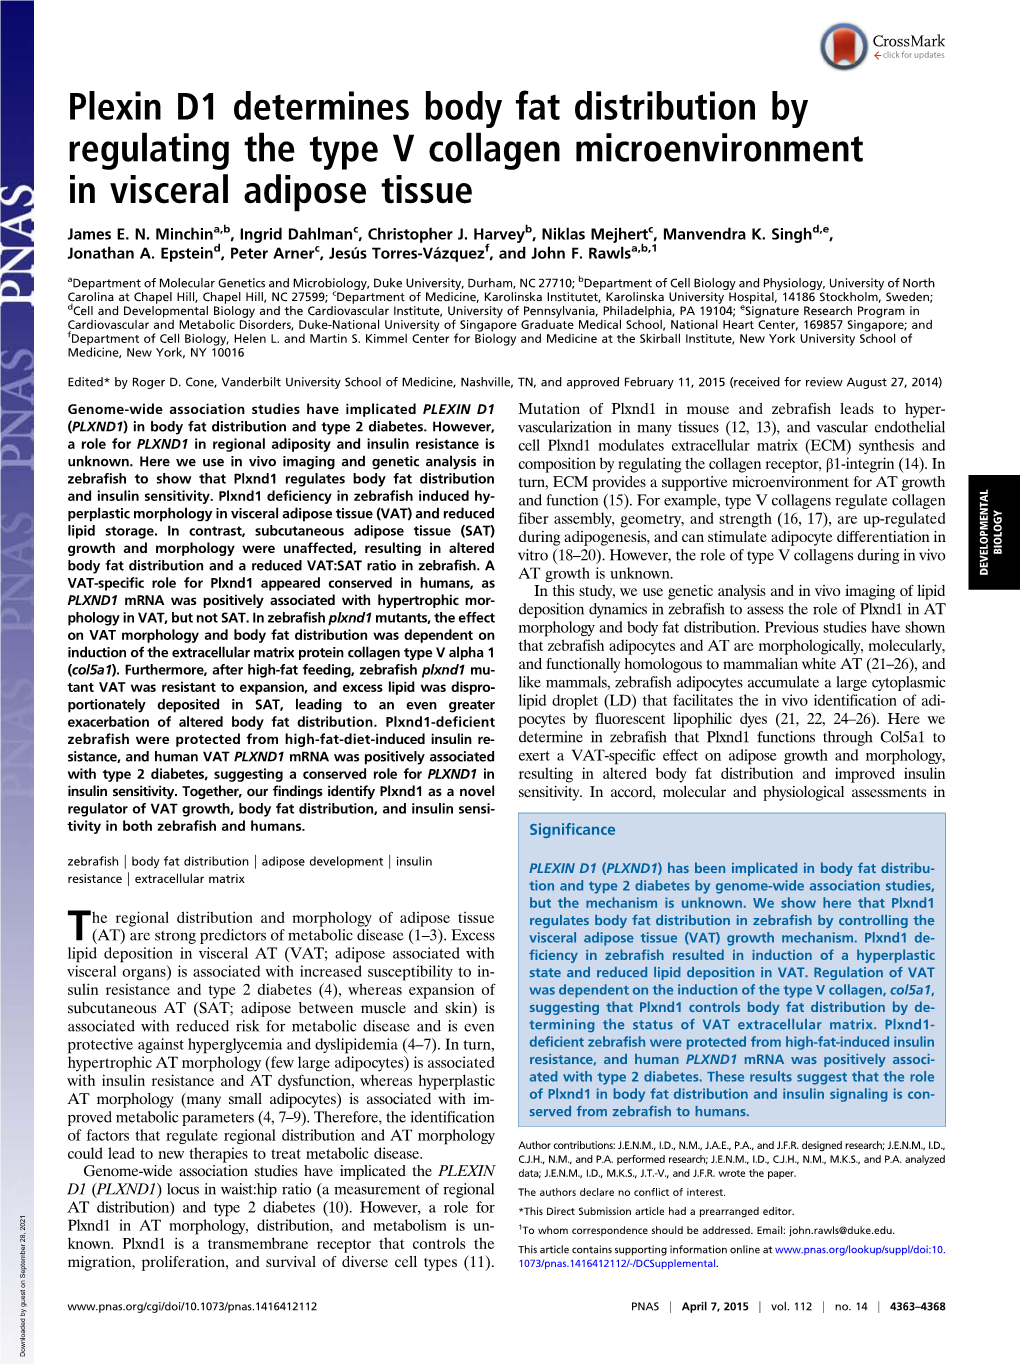 Plexin D1 Determines Body Fat Distribution by Regulating the Type V Collagen Microenvironment in Visceral Adipose Tissue